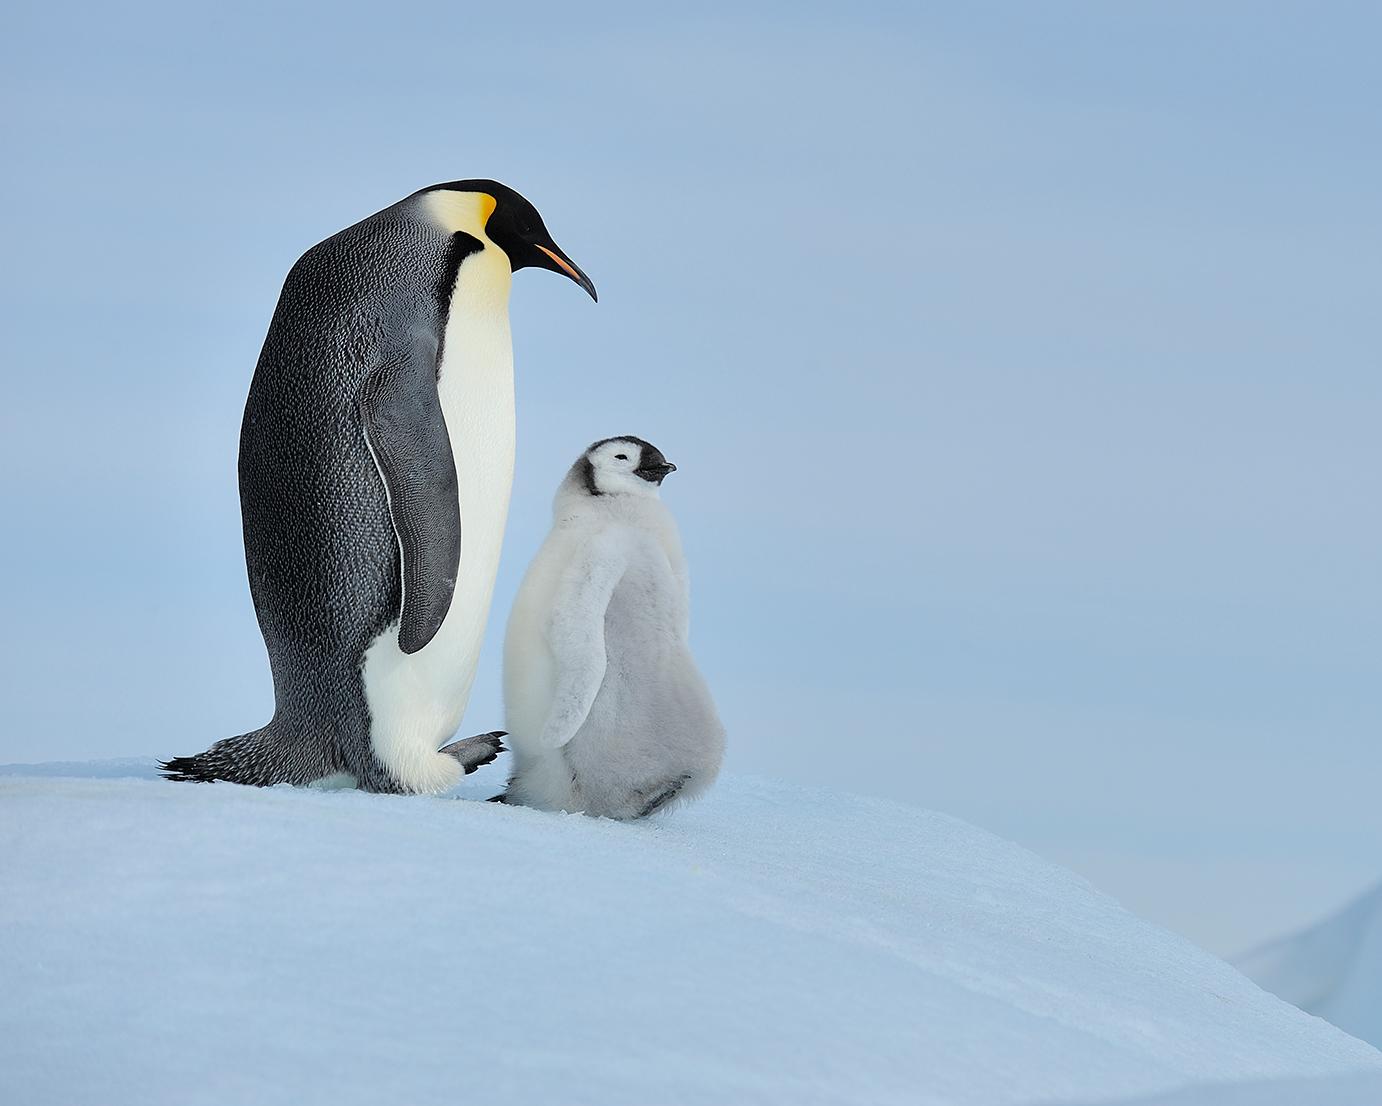 An emperor penguin and its chick stand against an icy backdrop. The penguin chick is light grey with a black head